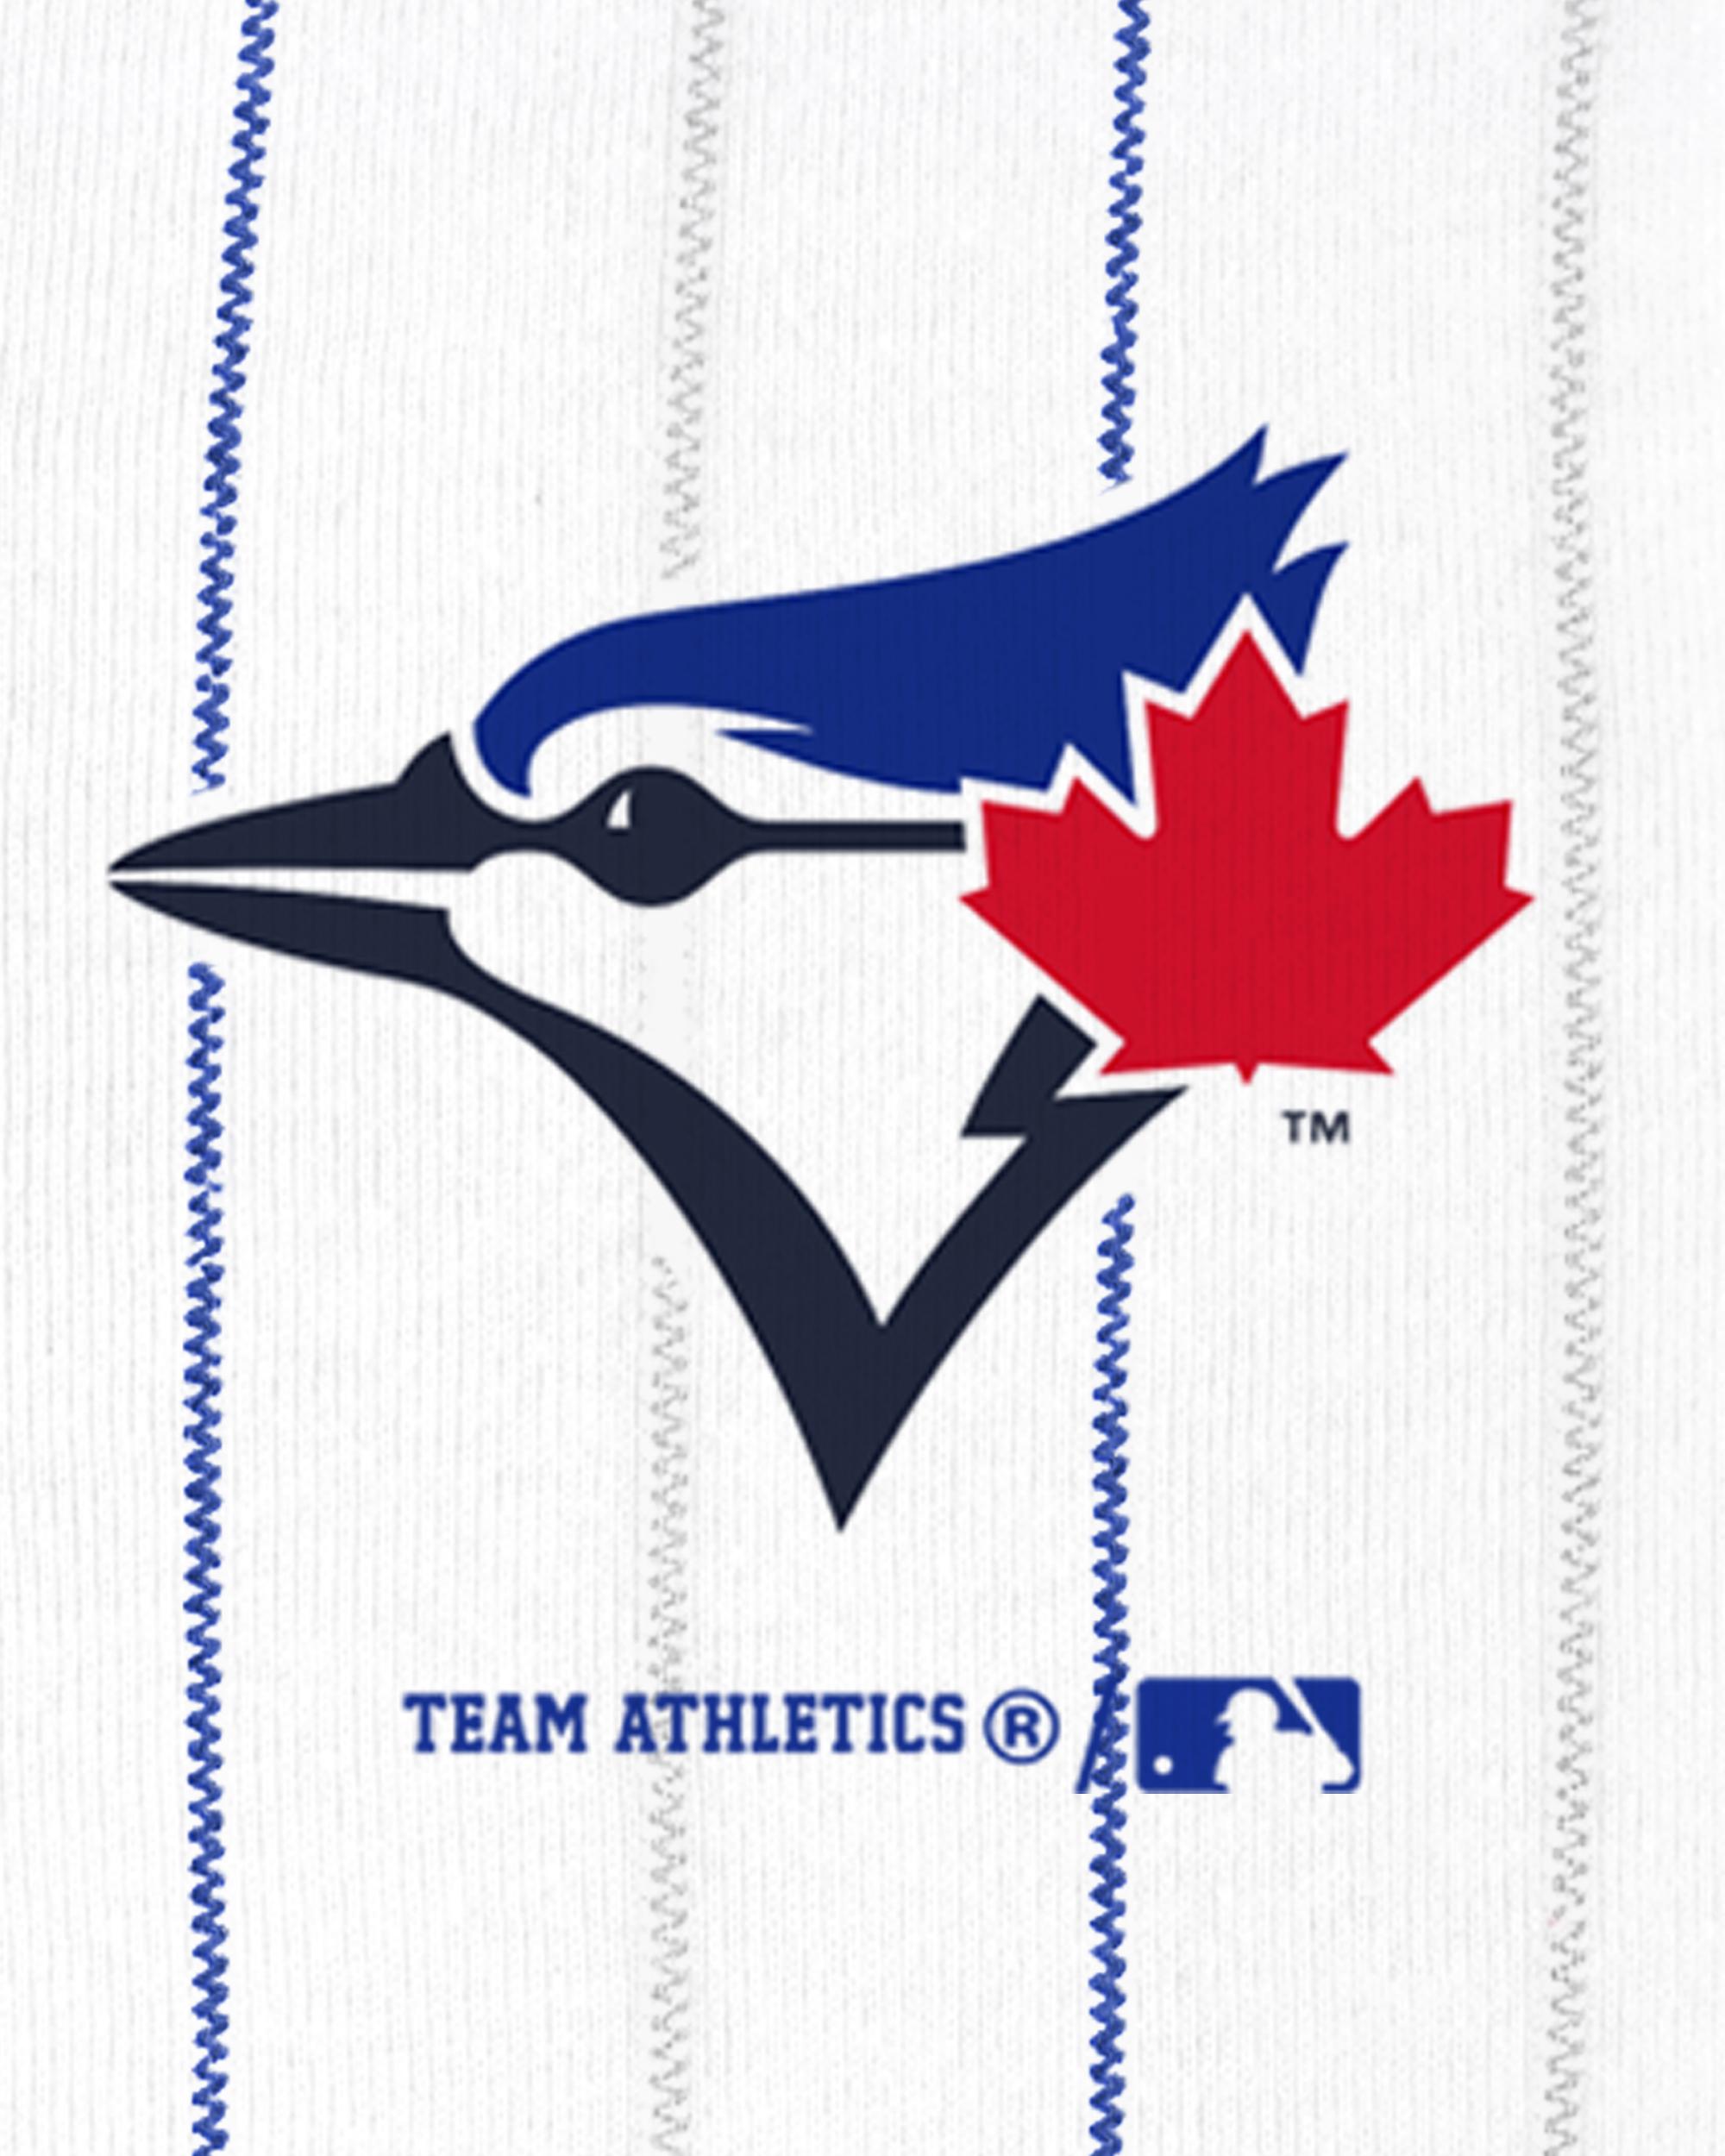 Toronto Blue Jays on X: We're ready to SHOUT 💯🙌 Good luck in